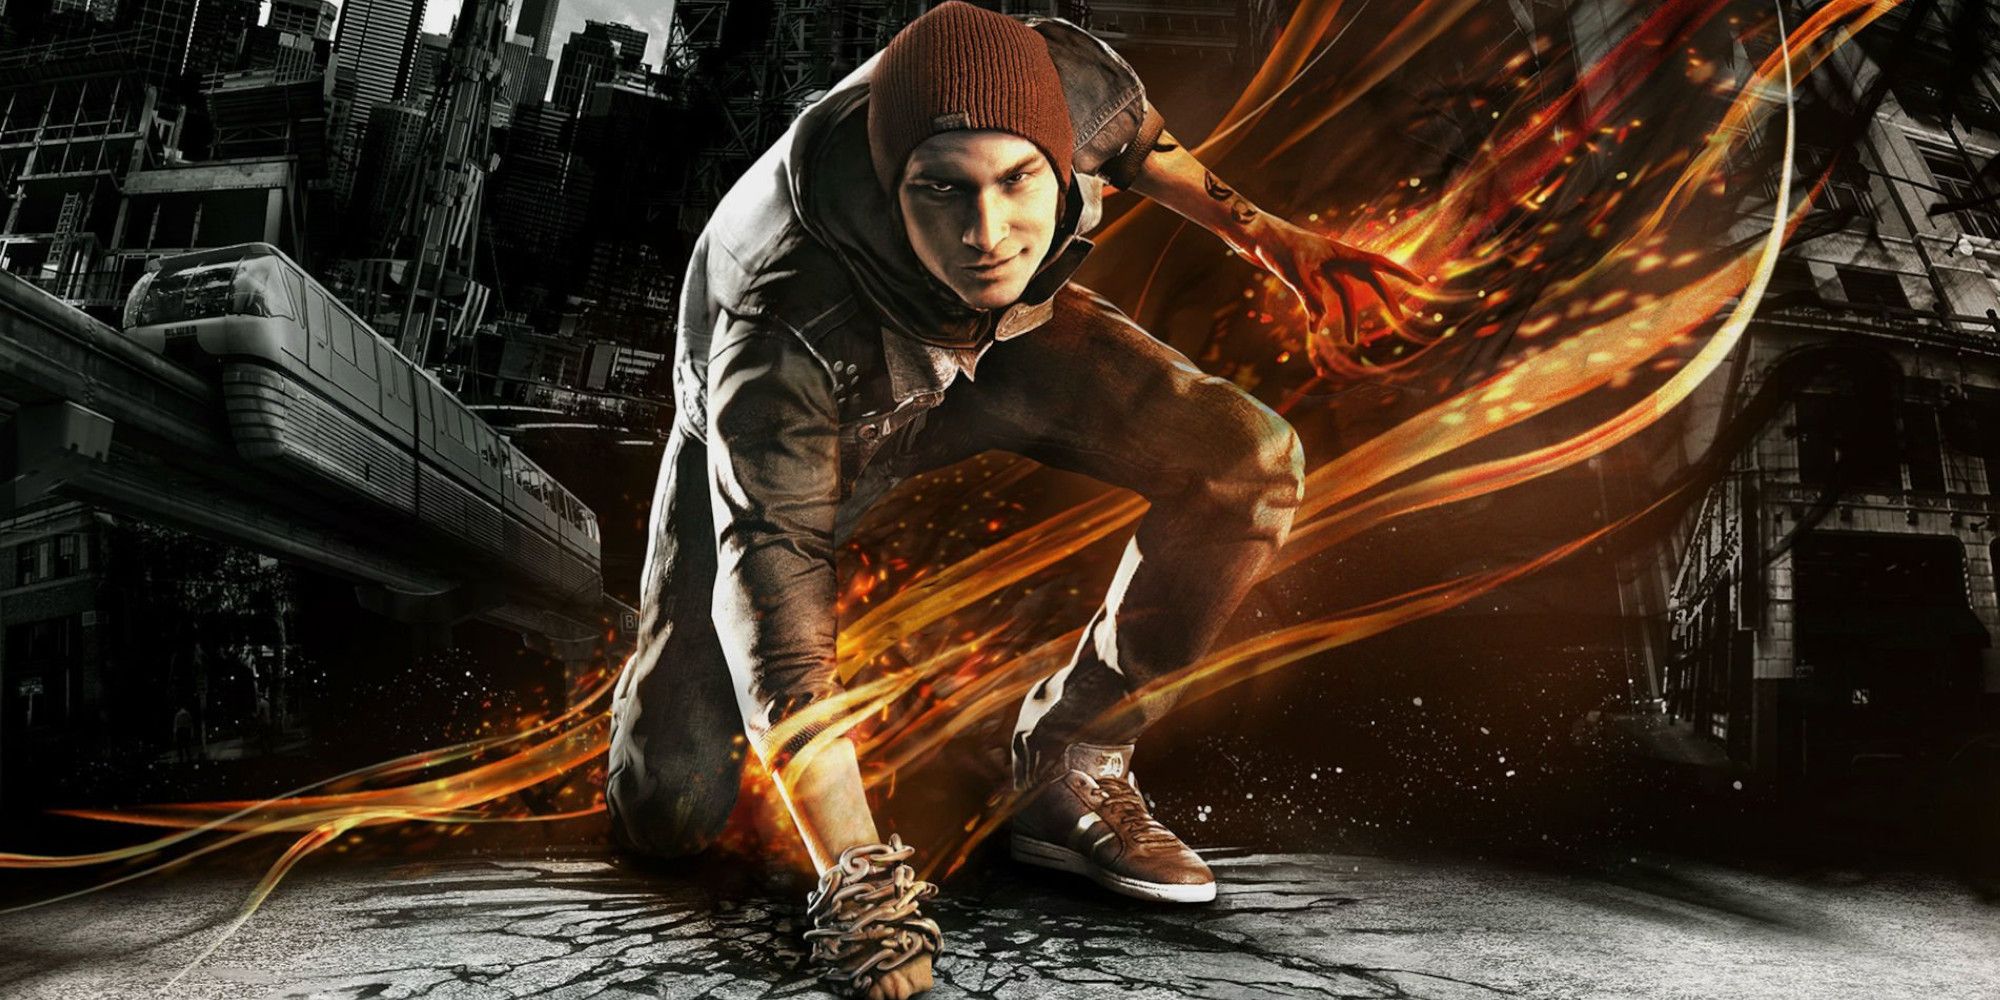 Infamous: Second Son A man crouches, poised, tendrils of fire flying from his fingertips